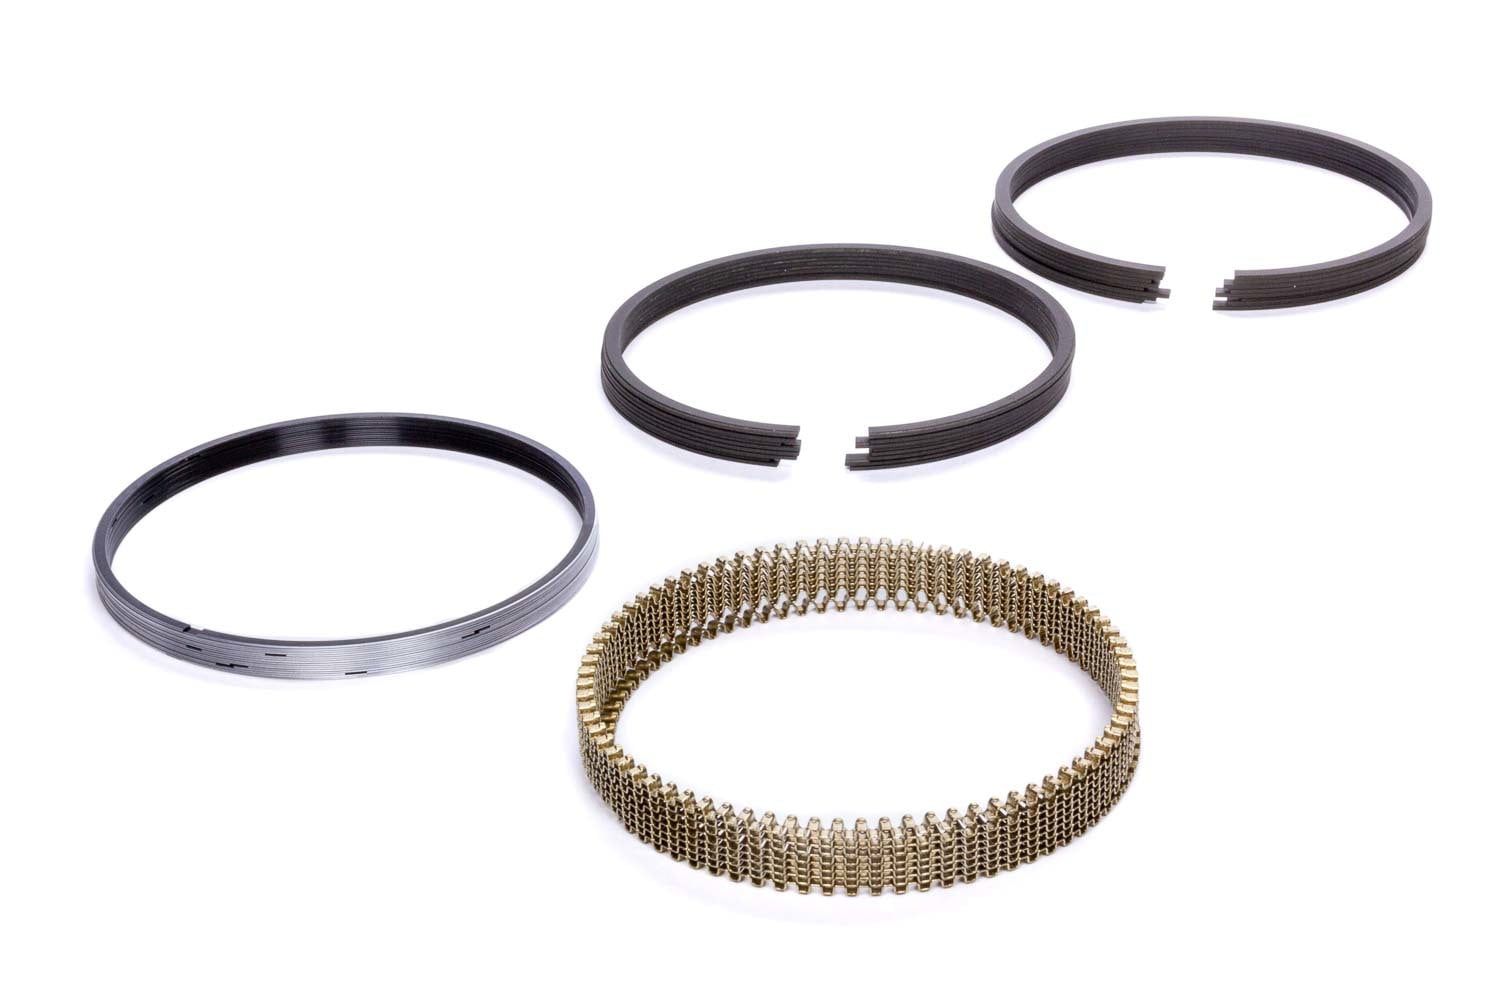 Piston Rings Standard Tension Stainless Steel 1.2 x 1.2 x 3.0 mm Thick 8 Cylinder Kit 4.025 in Bore